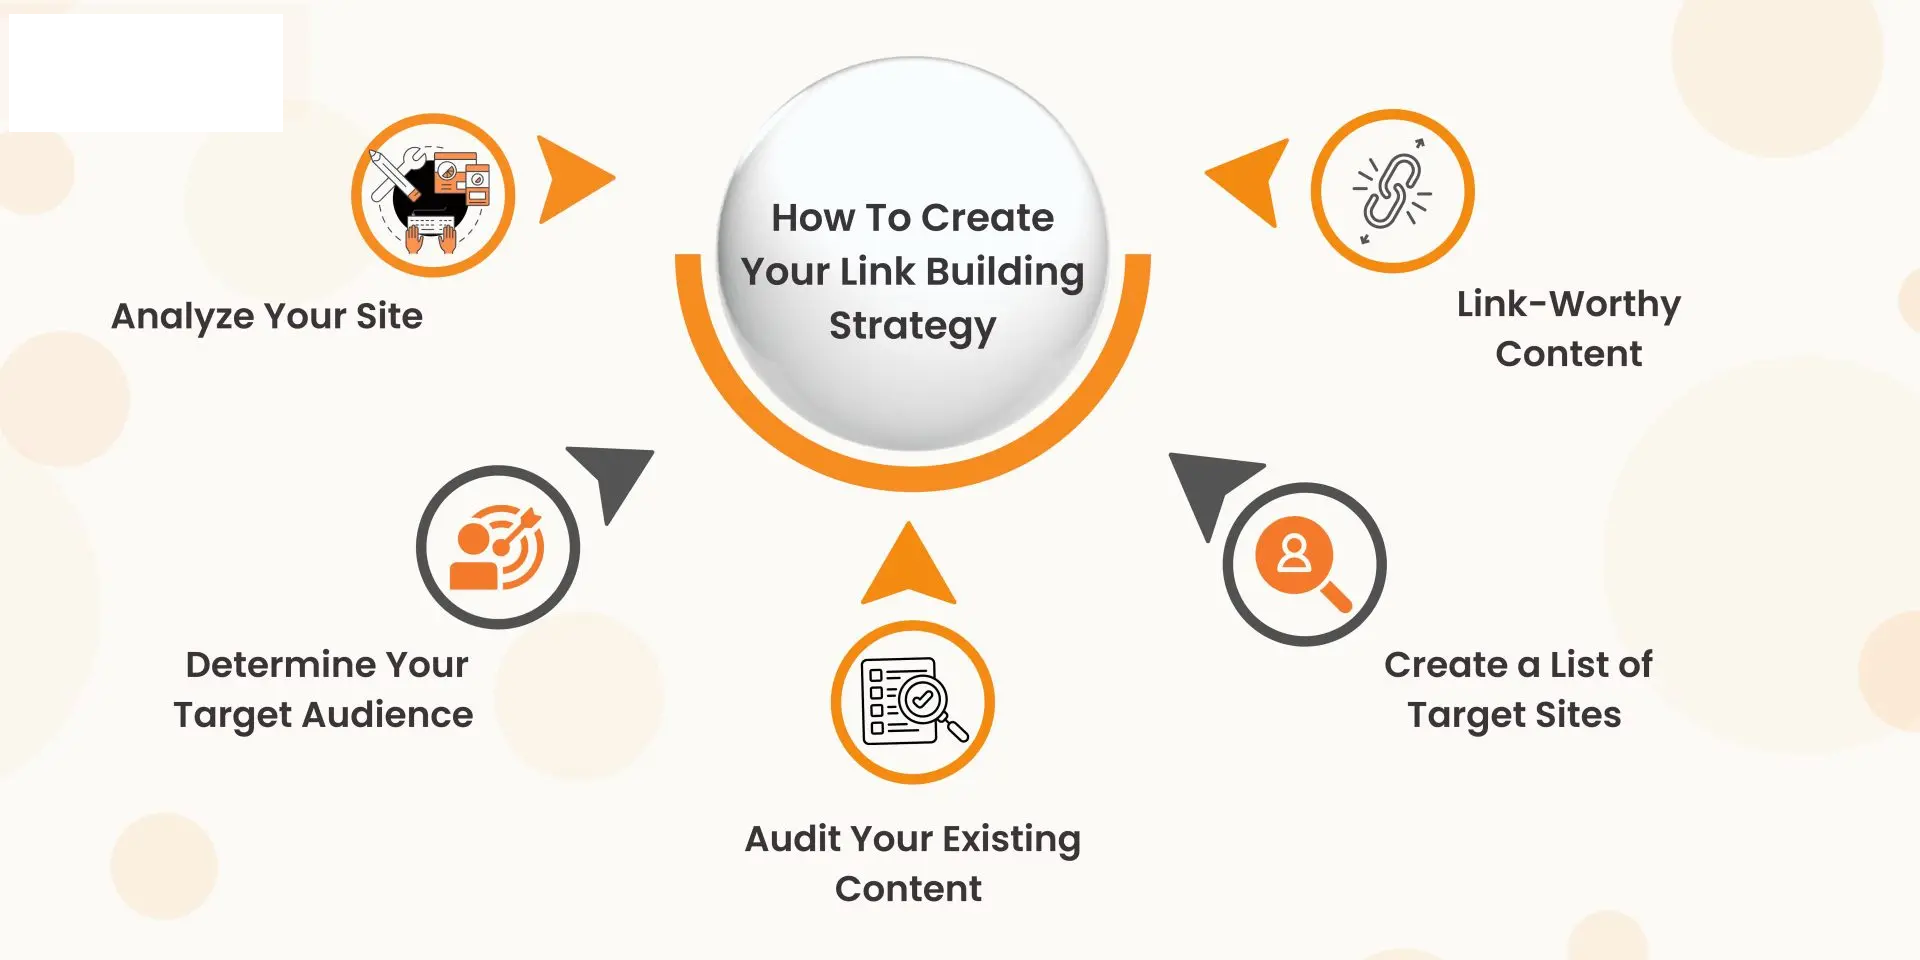 How to create your link building strategy explained